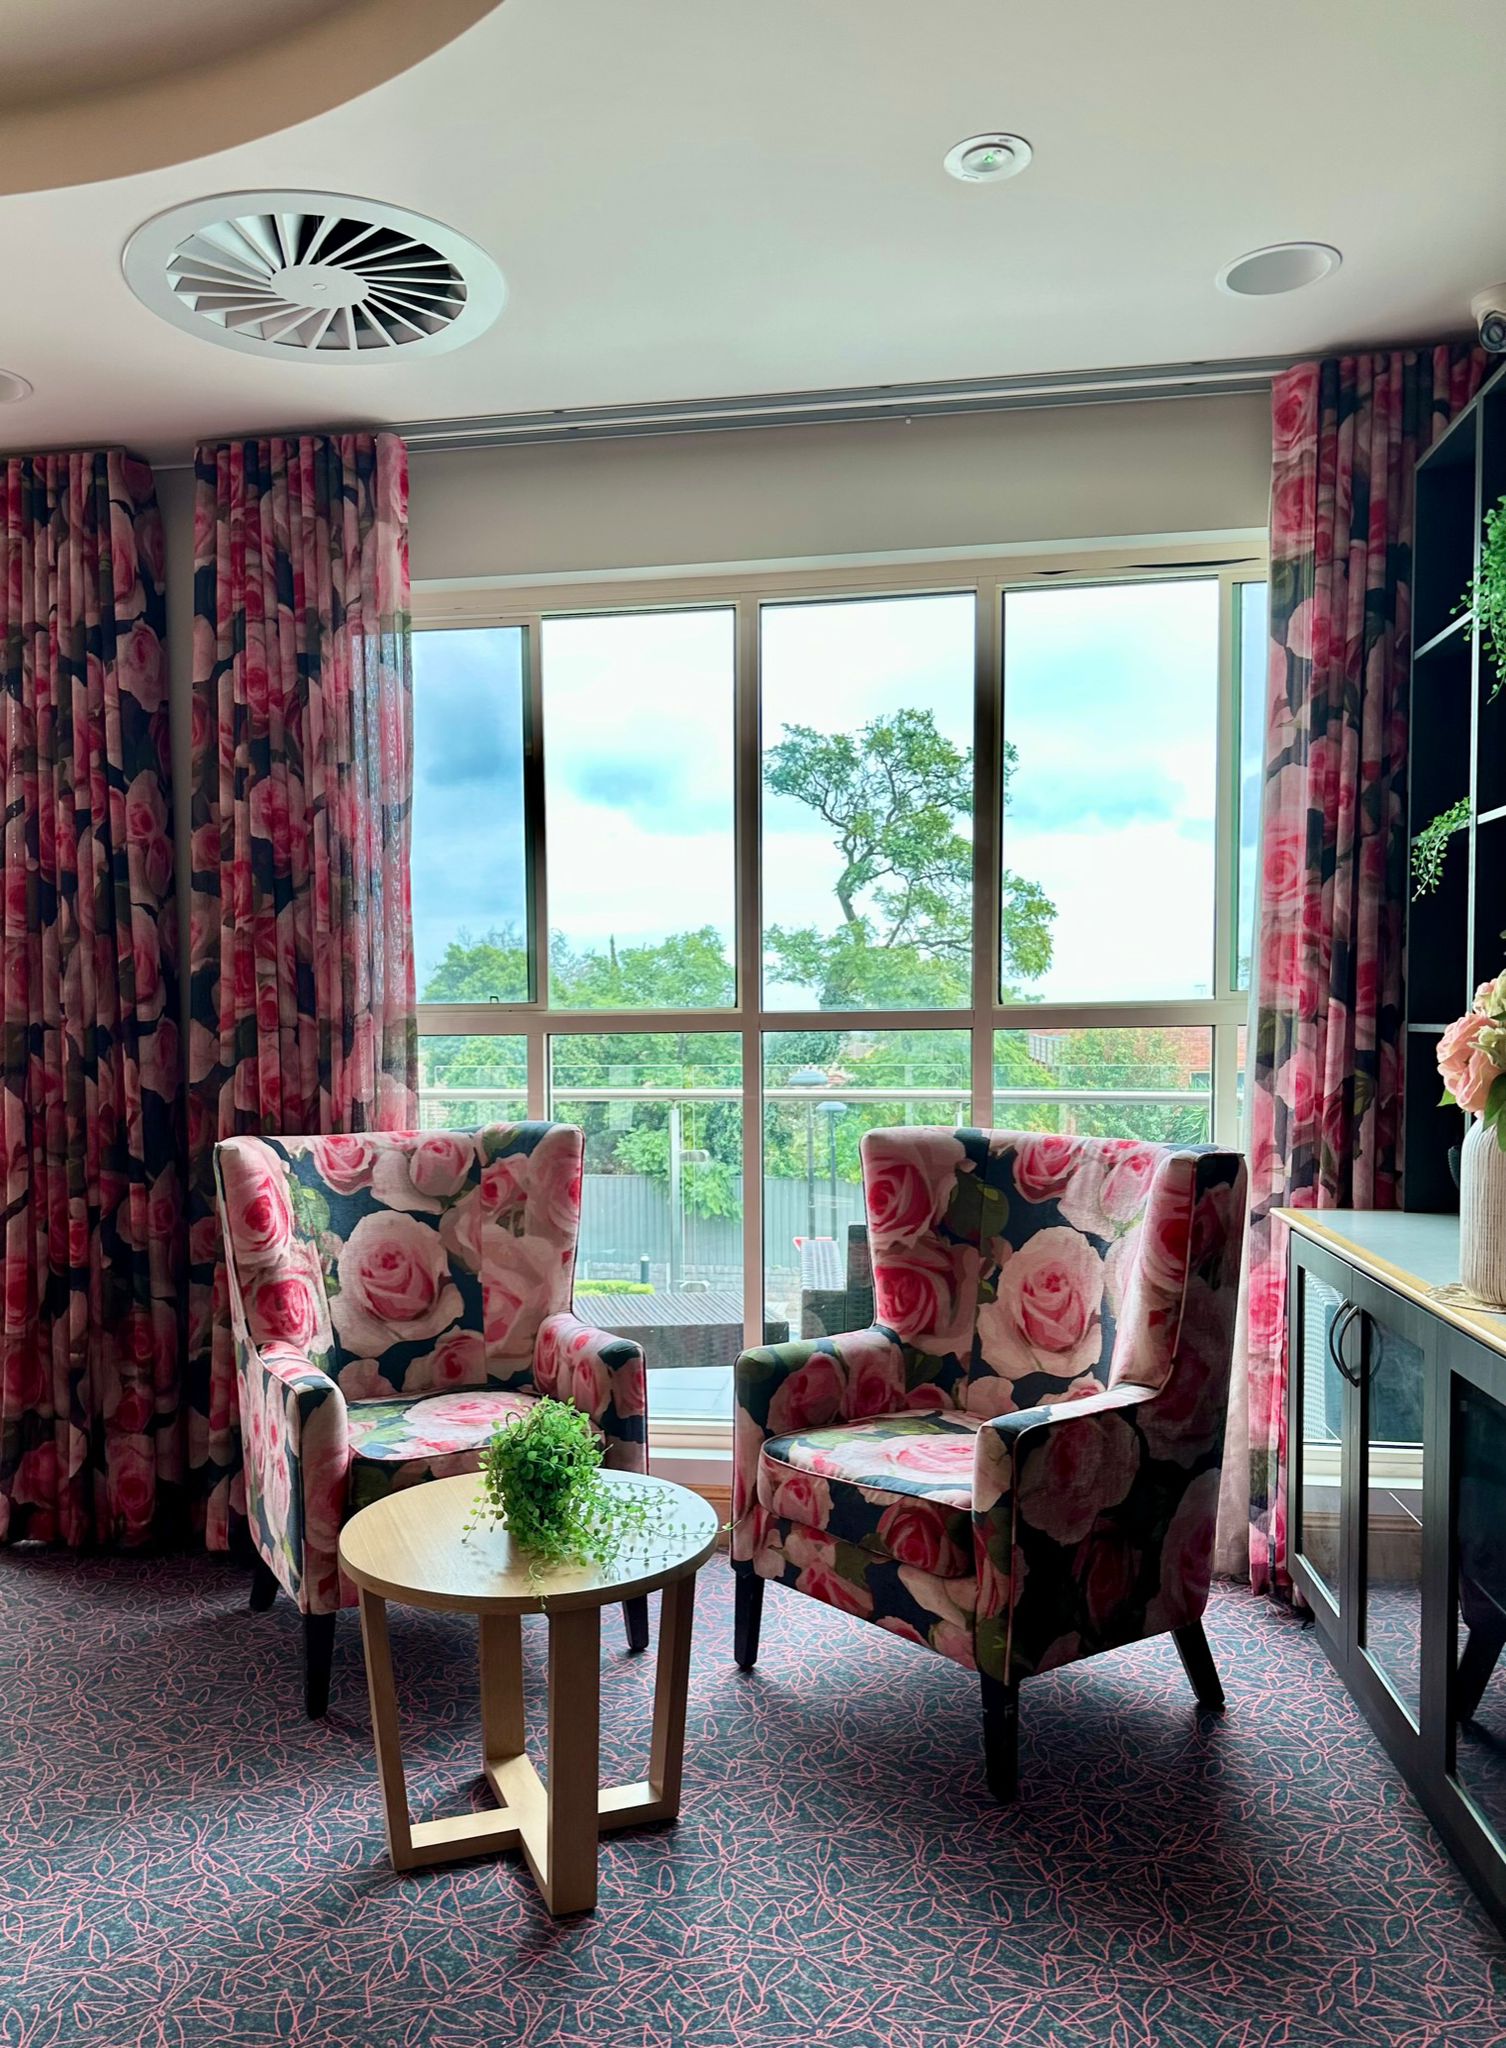 importance of design in an aged care setting. Custom upholstered chairs with coordinating curtains